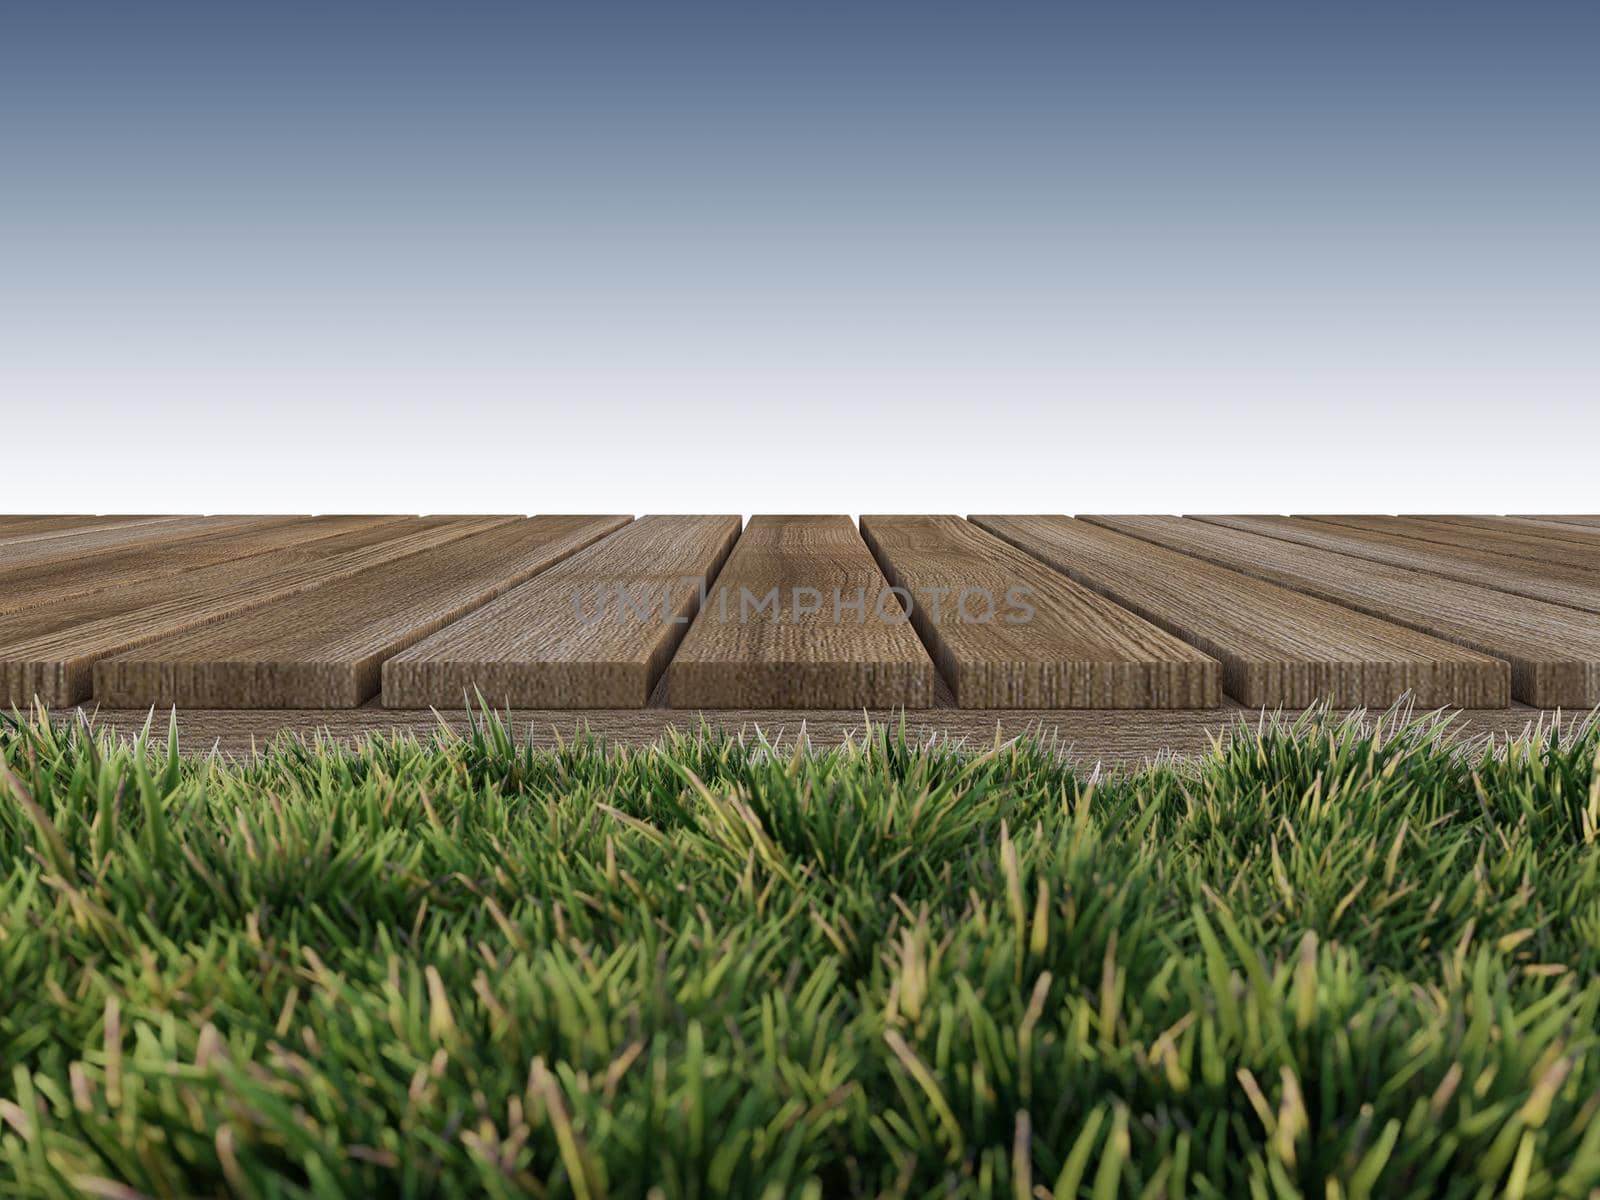 Mockup background for 3d rendering of wooden panel which have grasses as foreground. by Kankliang